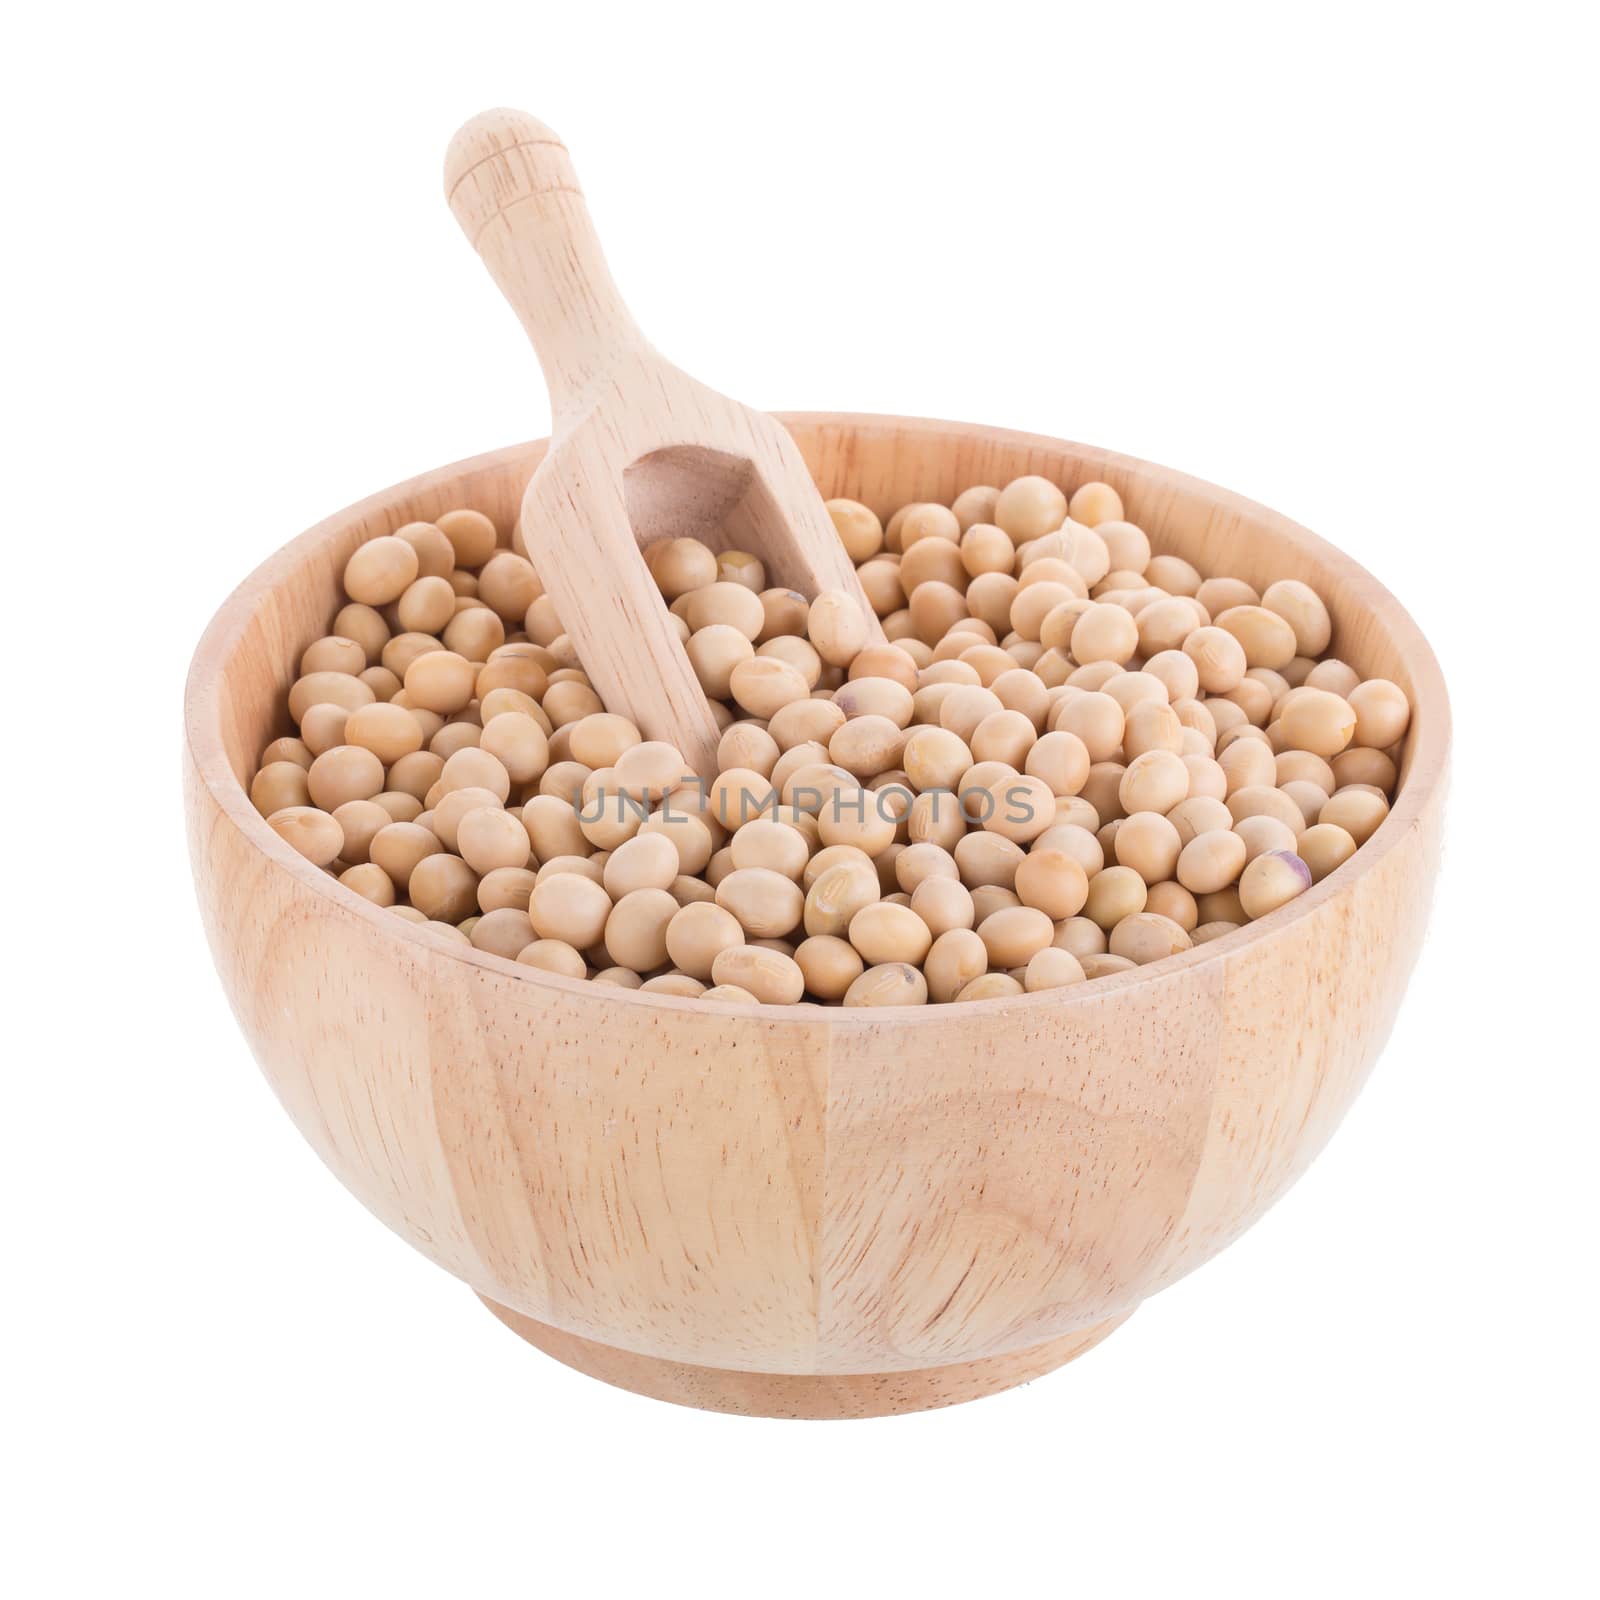 Soybeans in a wooden cup isolated on white background.